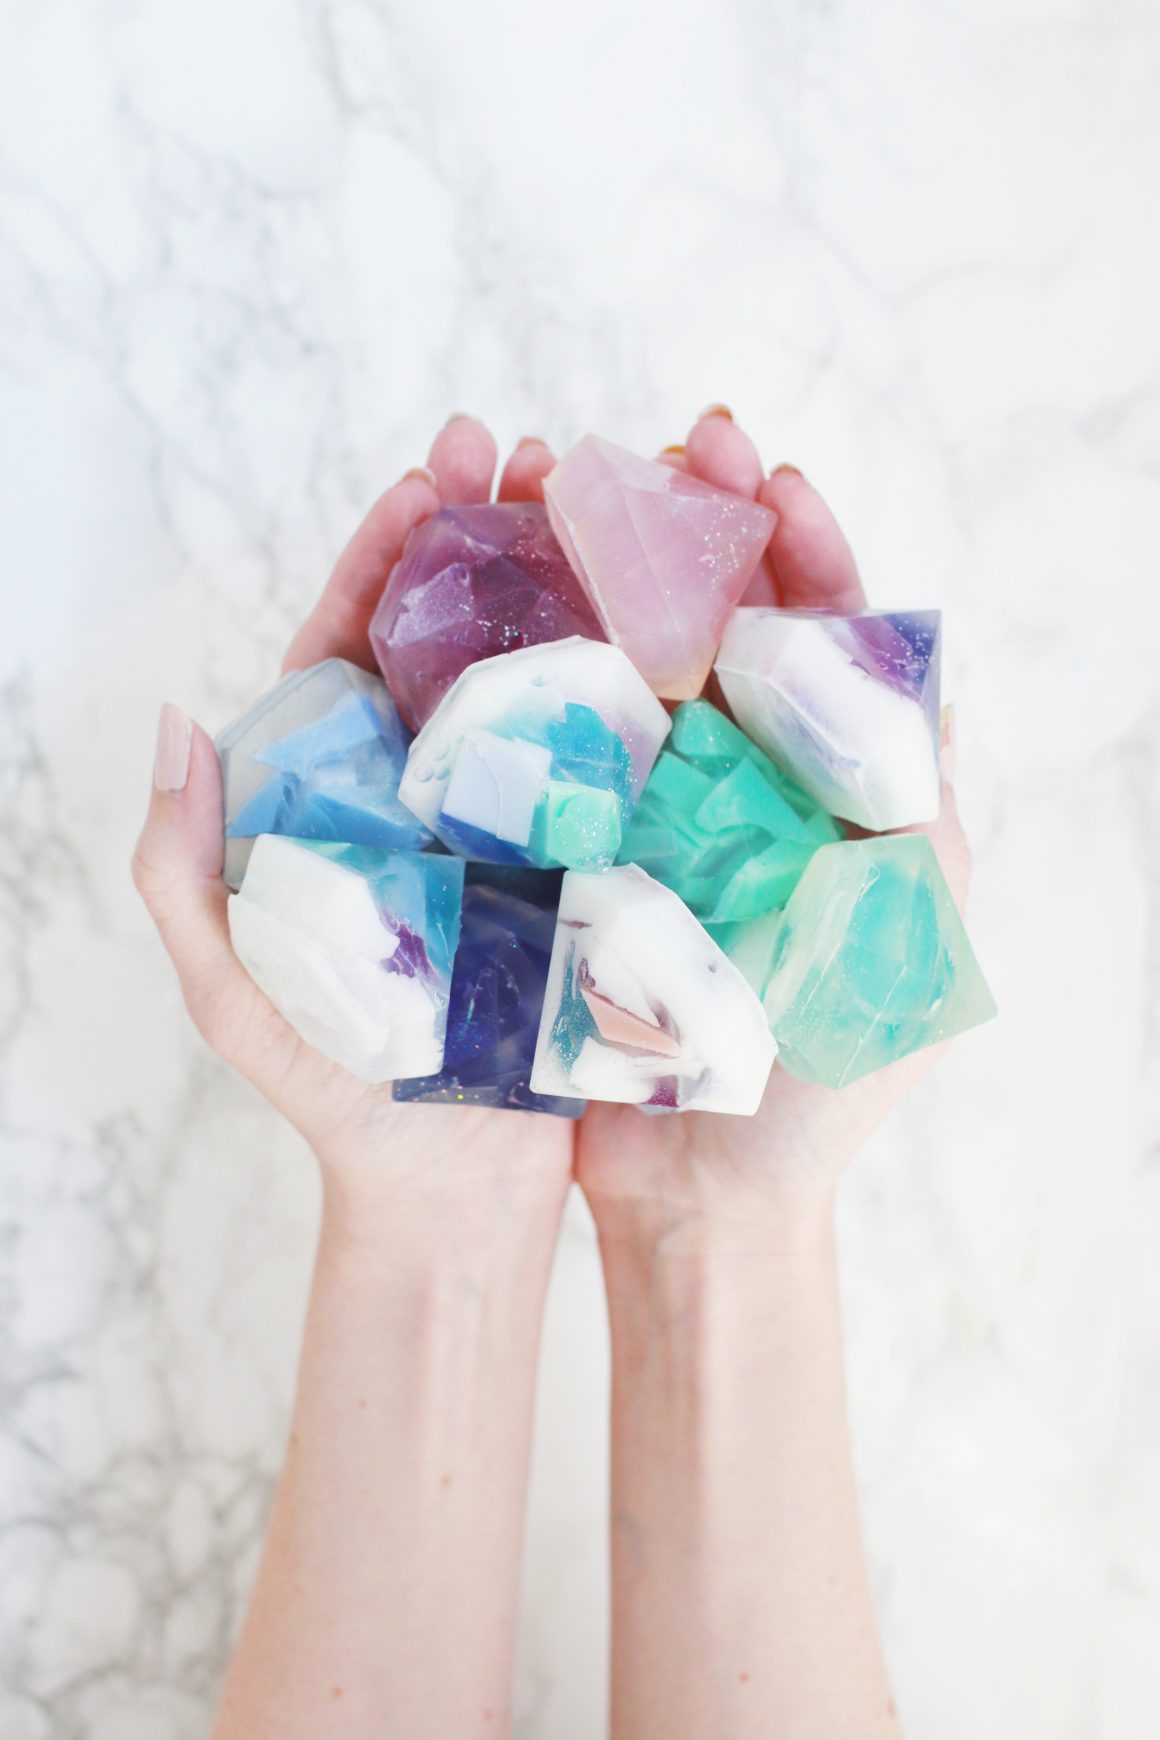 50 Easy Handmade Gift Ideas You'll Love: DIY Gemstone Soap from A Beautiful Mess